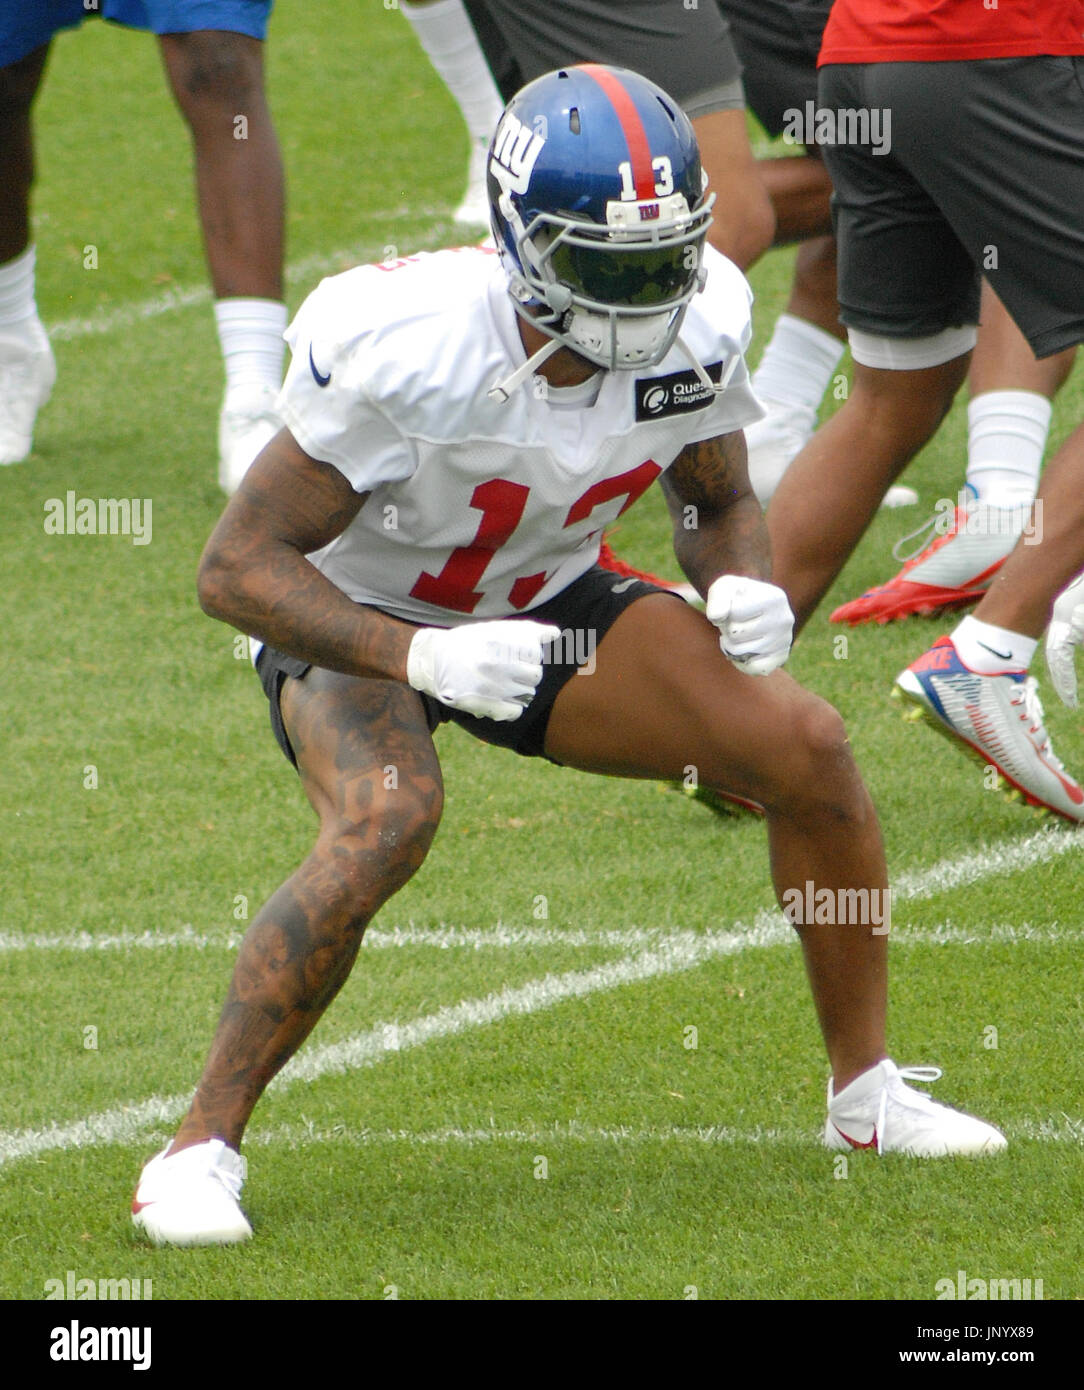 East Rutherford, USA. 29th Jul, 2017. The New York Football Giants took to the practice field in East Rutherford, NJ for NFL Training Camp on July 29, 2017. Odell Beckham Jr. and Brandon Marshall made plays at practice that excited the fans that were on hand to view the team. Credit: Roy Caratozzolo III/Alamy Live News Stock Photo